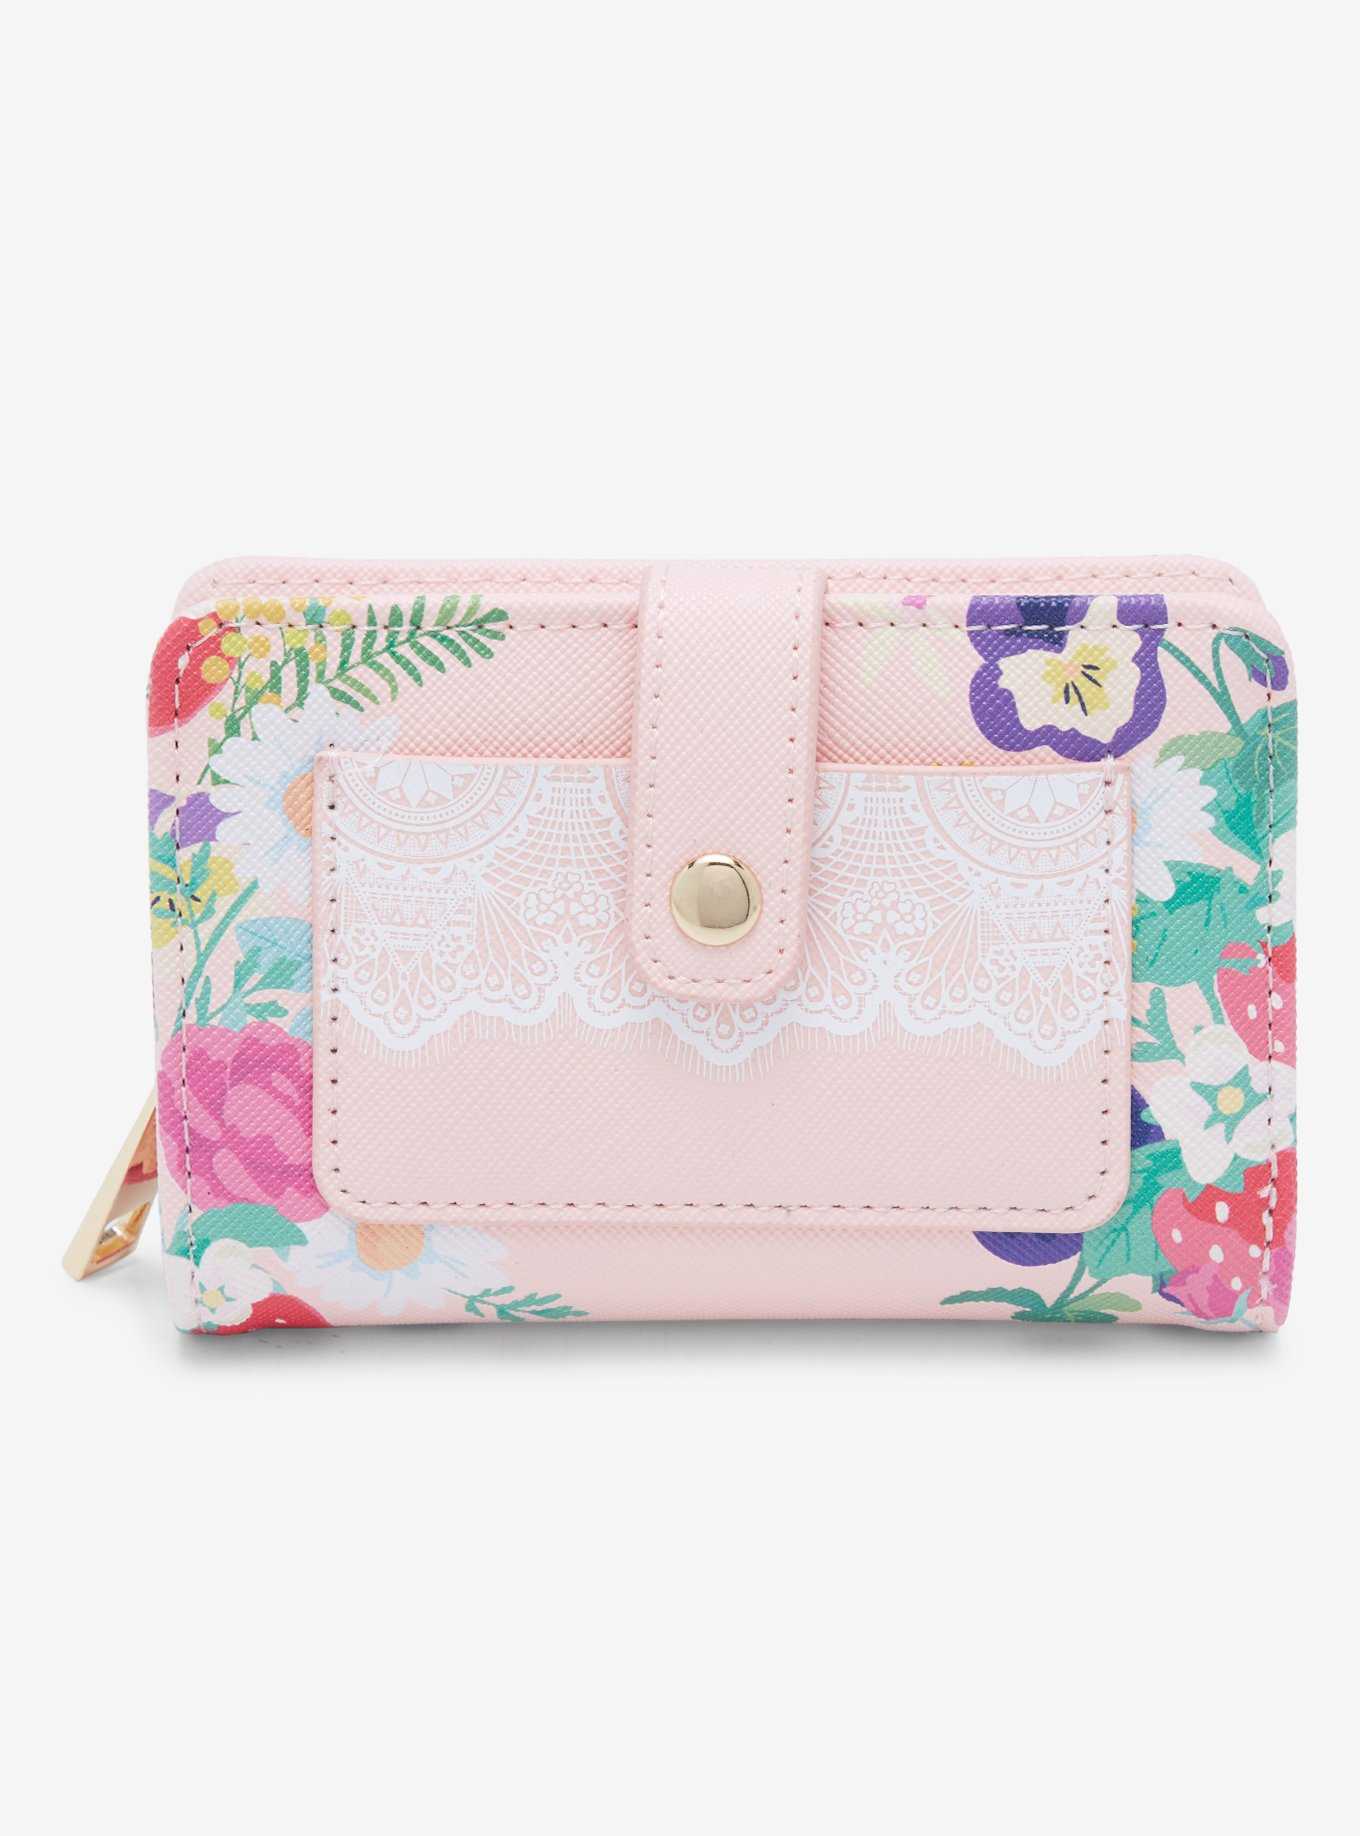 Sanrio Hello Kitty Floral Cardholder - BoxLunch Exclusive, , hi-res